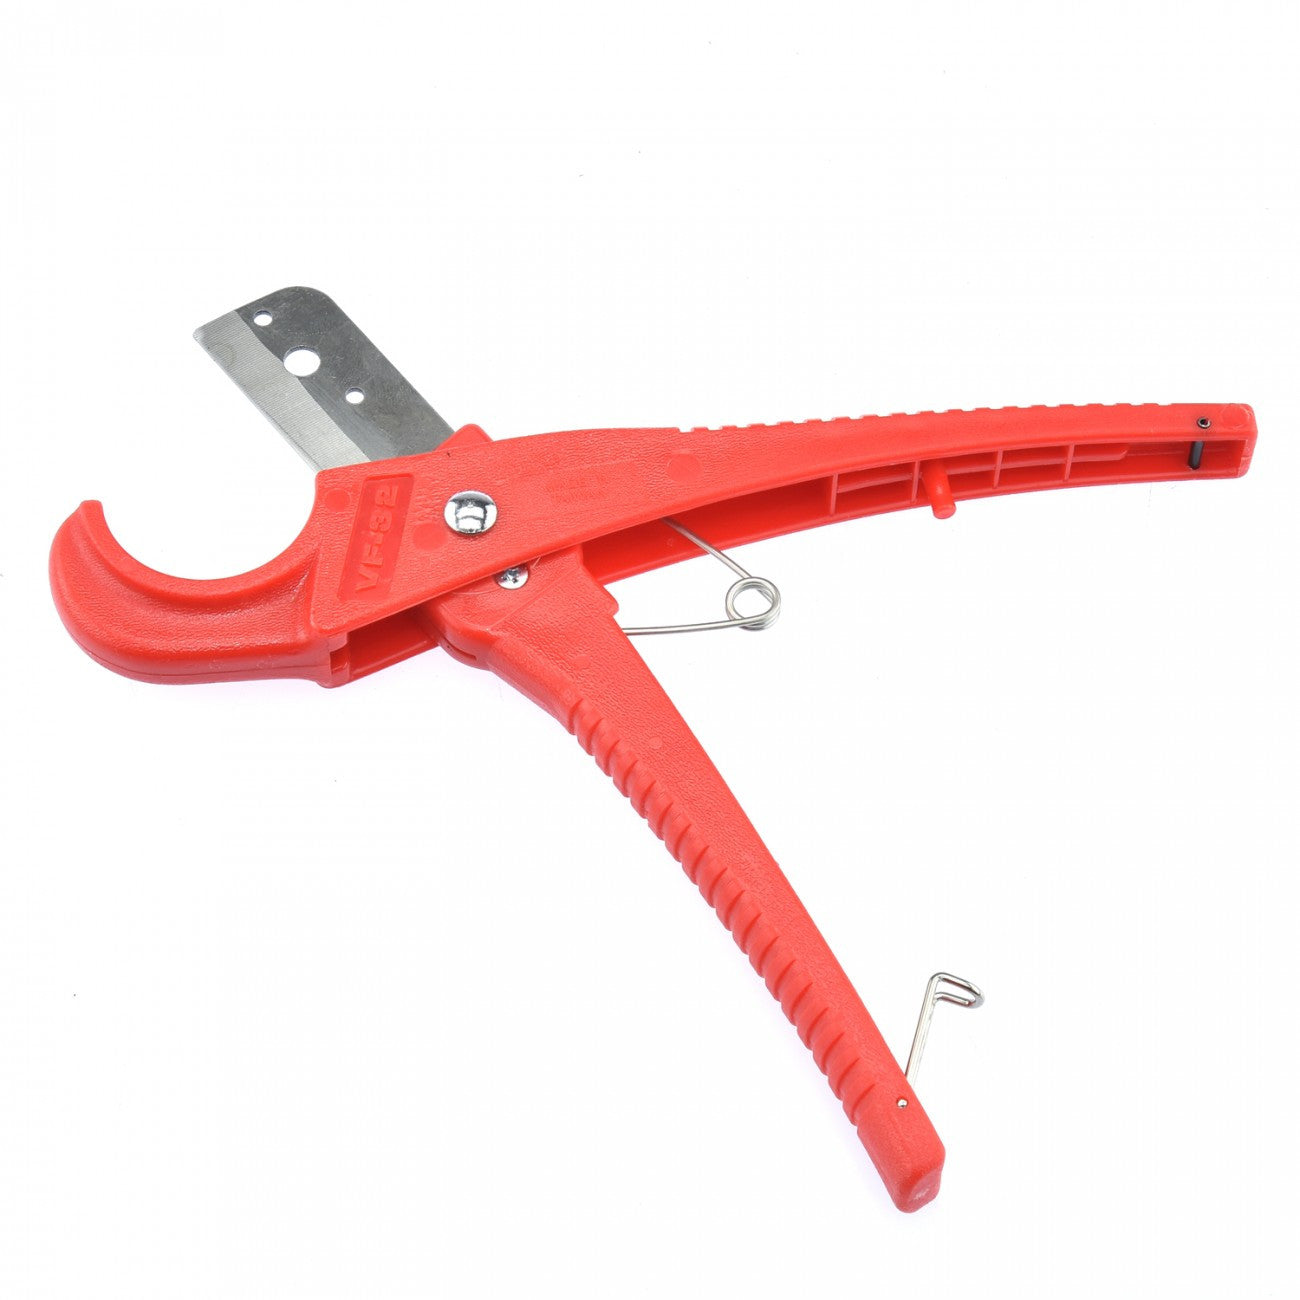 Flexible Rubber Hose Cutter Plastic Pipe Cutting Tool - tool